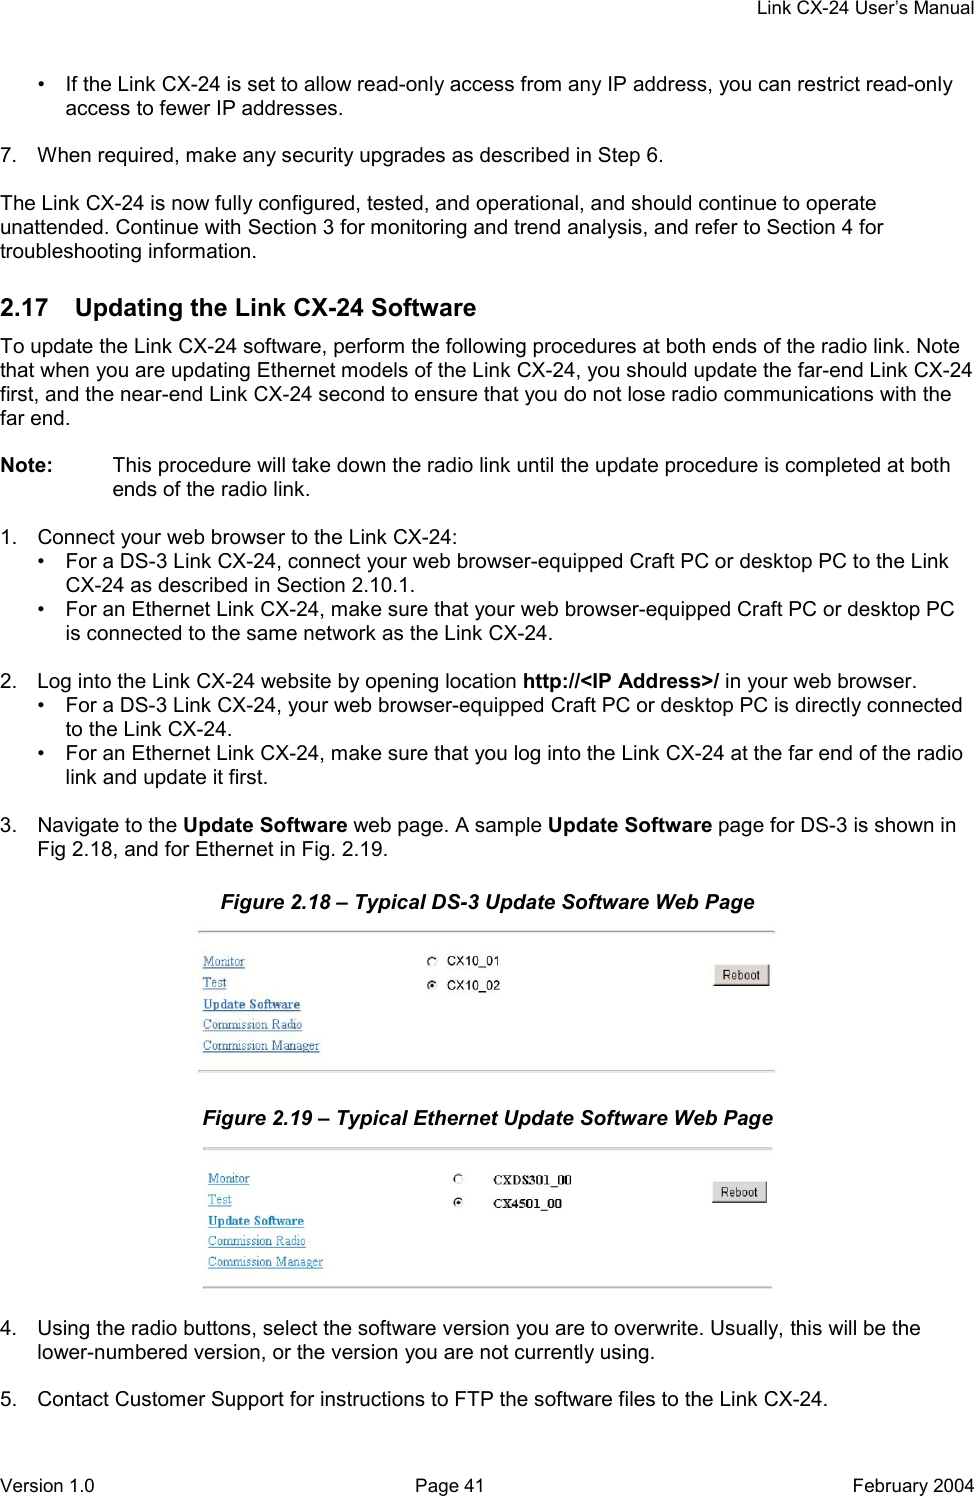     Link CX-24 User’s Manual Version 1.0  Page 41  February 2004 •  If the Link CX-24 is set to allow read-only access from any IP address, you can restrict read-only access to fewer IP addresses.  7.  When required, make any security upgrades as described in Step 6.  The Link CX-24 is now fully configured, tested, and operational, and should continue to operate unattended. Continue with Section 3 for monitoring and trend analysis, and refer to Section 4 for troubleshooting information. 2.17  Updating the Link CX-24 Software To update the Link CX-24 software, perform the following procedures at both ends of the radio link. Note that when you are updating Ethernet models of the Link CX-24, you should update the far-end Link CX-24 first, and the near-end Link CX-24 second to ensure that you do not lose radio communications with the far end.  Note:  This procedure will take down the radio link until the update procedure is completed at both ends of the radio link.  1.  Connect your web browser to the Link CX-24: •  For a DS-3 Link CX-24, connect your web browser-equipped Craft PC or desktop PC to the Link CX-24 as described in Section 2.10.1. •  For an Ethernet Link CX-24, make sure that your web browser-equipped Craft PC or desktop PC is connected to the same network as the Link CX-24.  2.  Log into the Link CX-24 website by opening location http://&lt;IP Address&gt;/ in your web browser. •  For a DS-3 Link CX-24, your web browser-equipped Craft PC or desktop PC is directly connected to the Link CX-24. •  For an Ethernet Link CX-24, make sure that you log into the Link CX-24 at the far end of the radio link and update it first.  3.  Navigate to the Update Software web page. A sample Update Software page for DS-3 is shown in Fig 2.18, and for Ethernet in Fig. 2.19. Figure 2.18 – Typical DS-3 Update Software Web Page  Figure 2.19 – Typical Ethernet Update Software Web Page   4.  Using the radio buttons, select the software version you are to overwrite. Usually, this will be the lower-numbered version, or the version you are not currently using.  5.  Contact Customer Support for instructions to FTP the software files to the Link CX-24. 